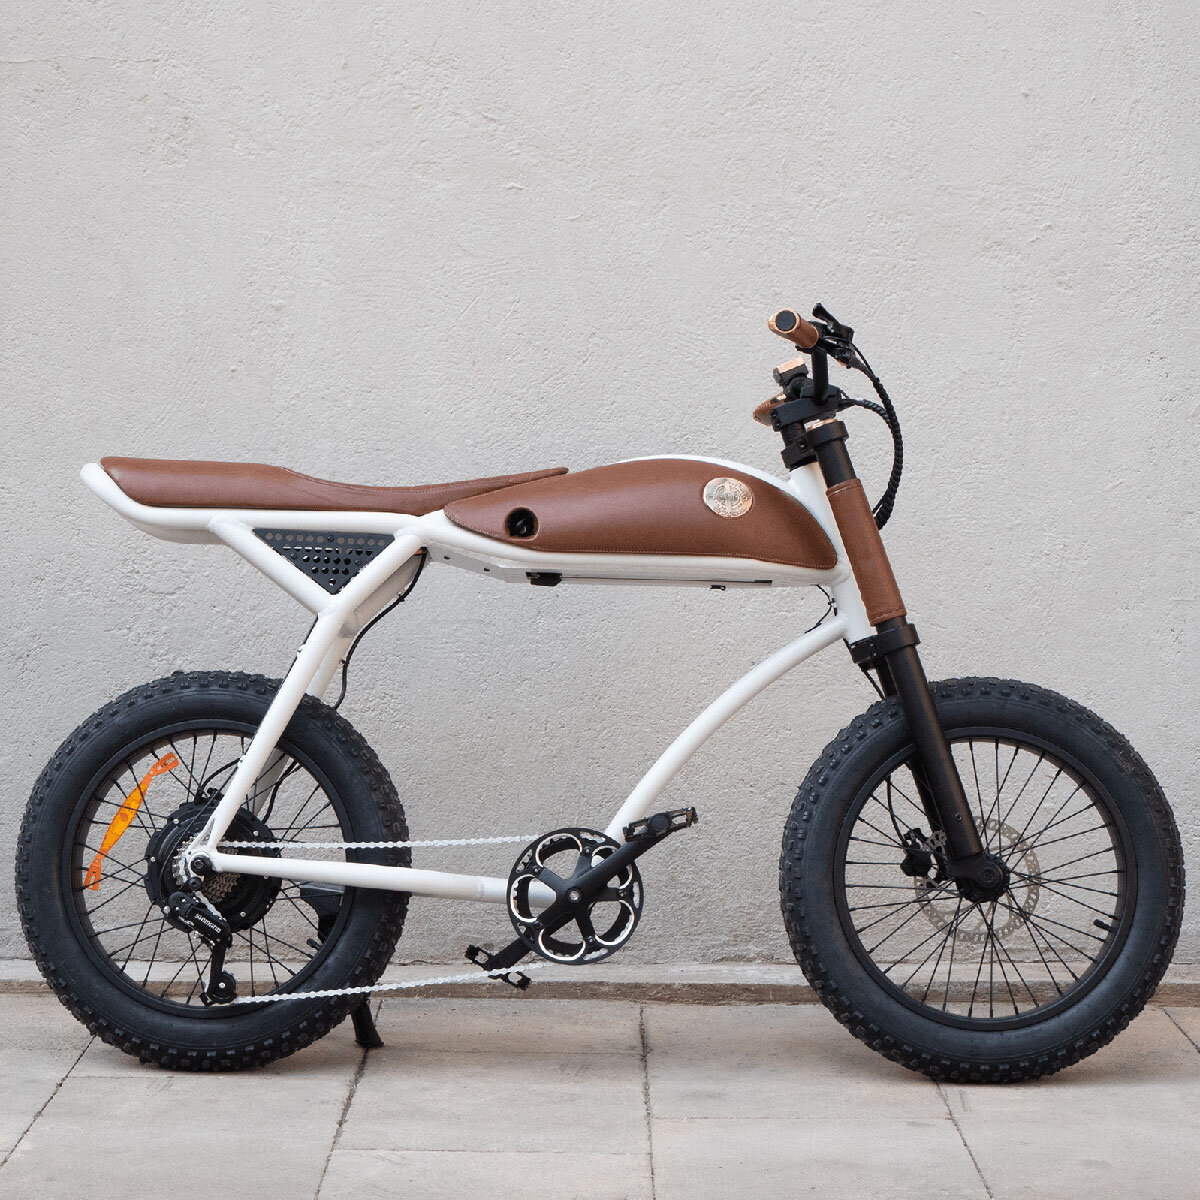 Rayvolt Ringo E-Bike with Lights, Leather Bag, Set Up Assistance And First Year Inspection in White